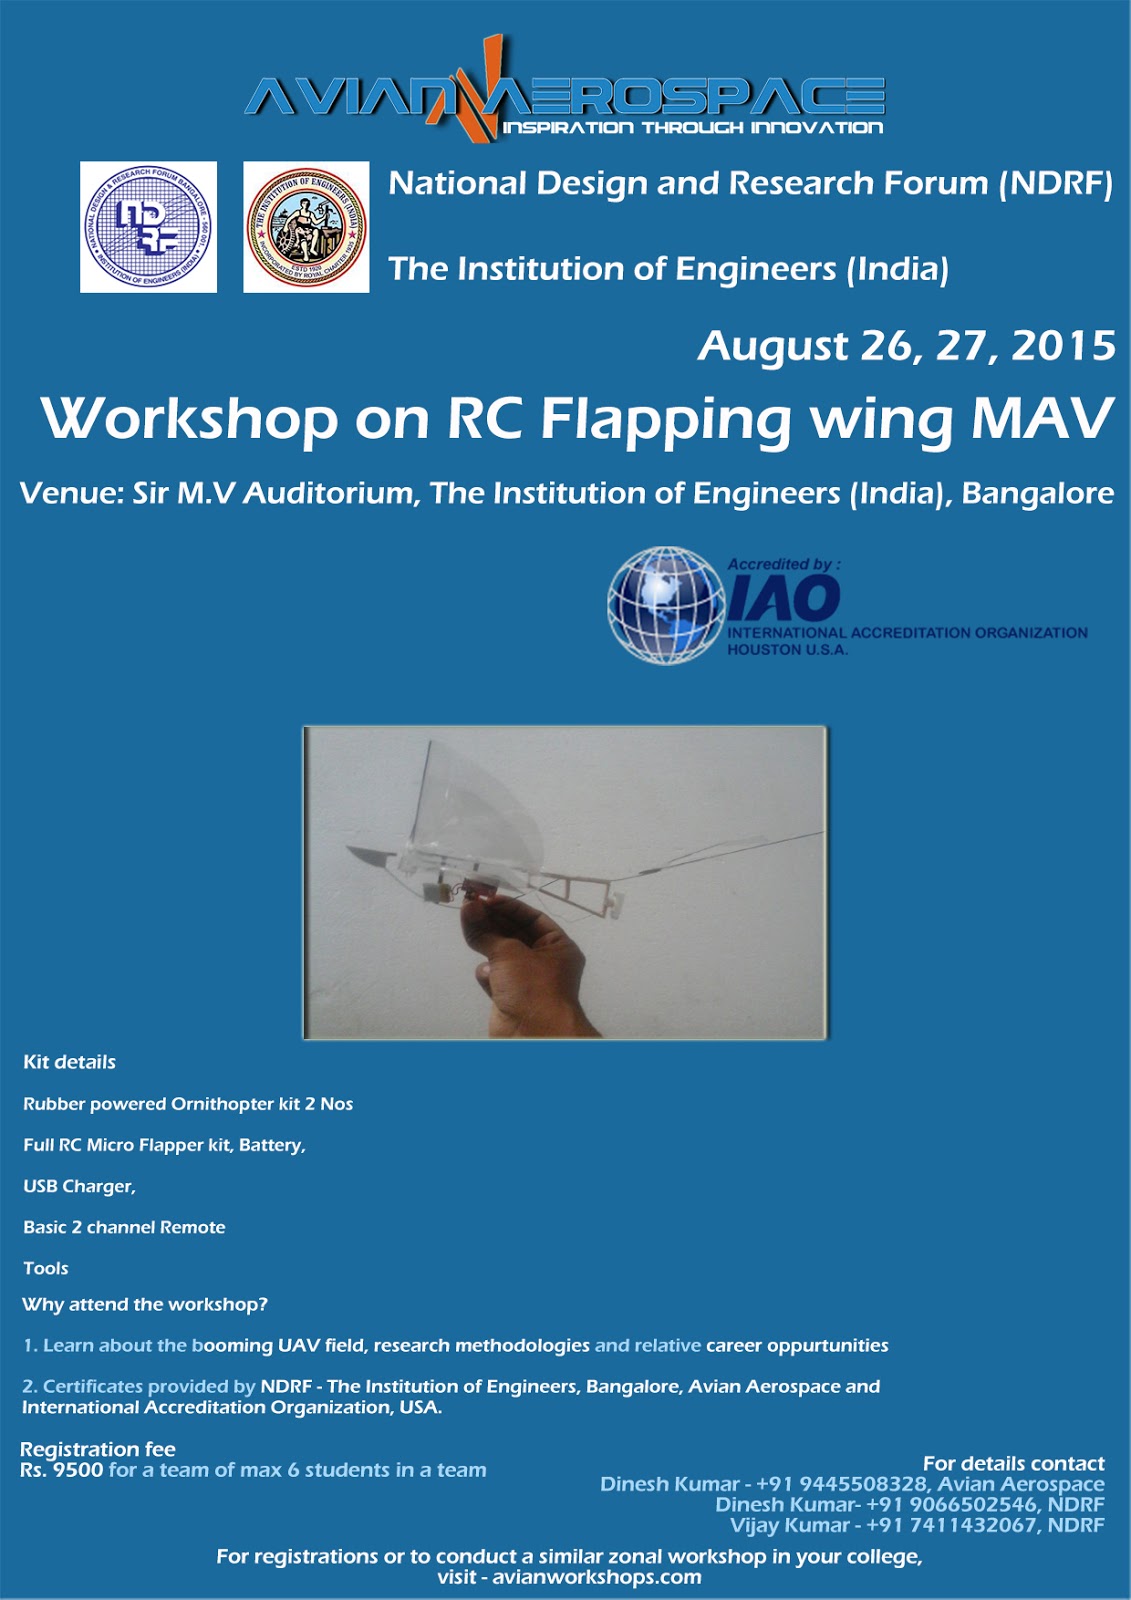 Two days workshop on RC Flapping wing Micro Aerial Vehicle